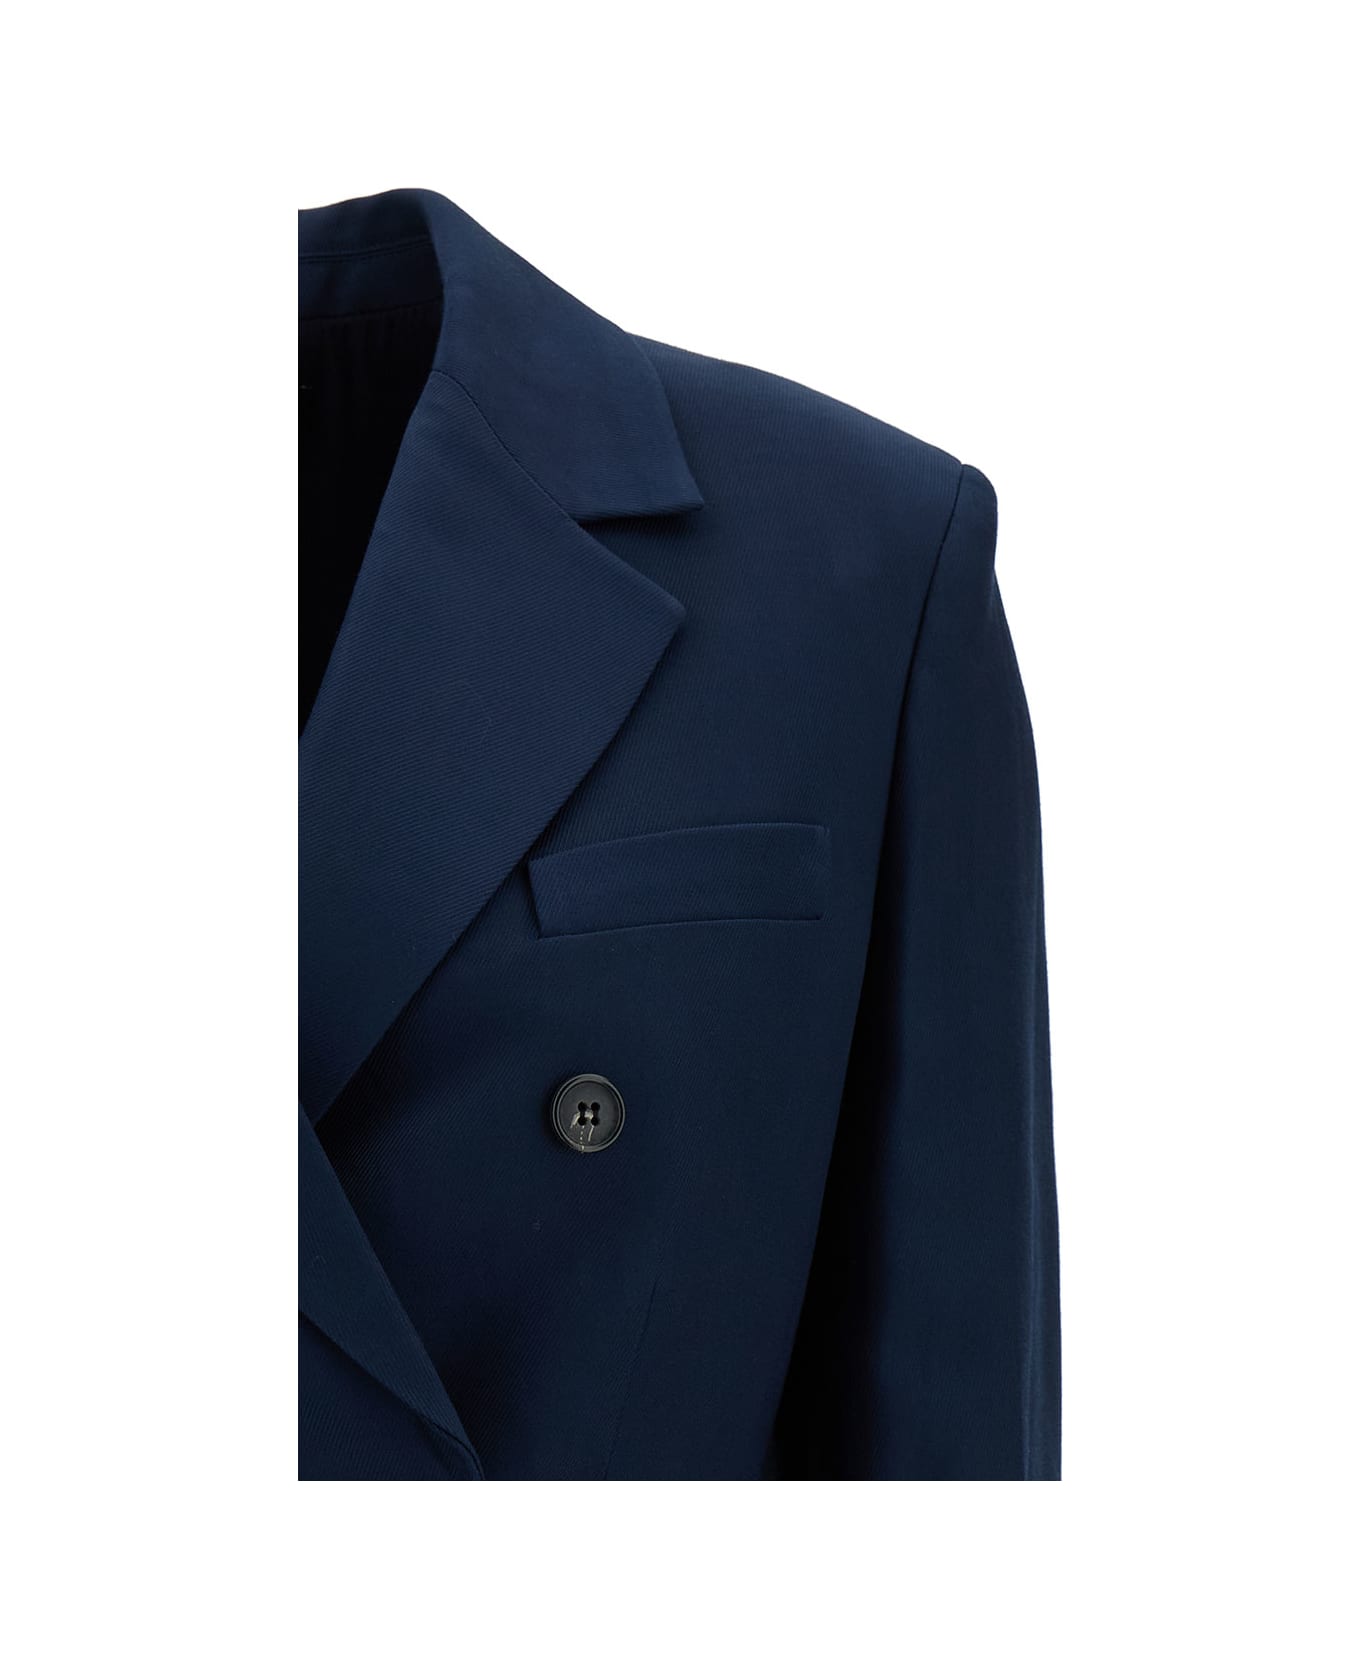 Theory Blue Double-breasted Jacket With Notched Revers In Viscose Woman - Navy